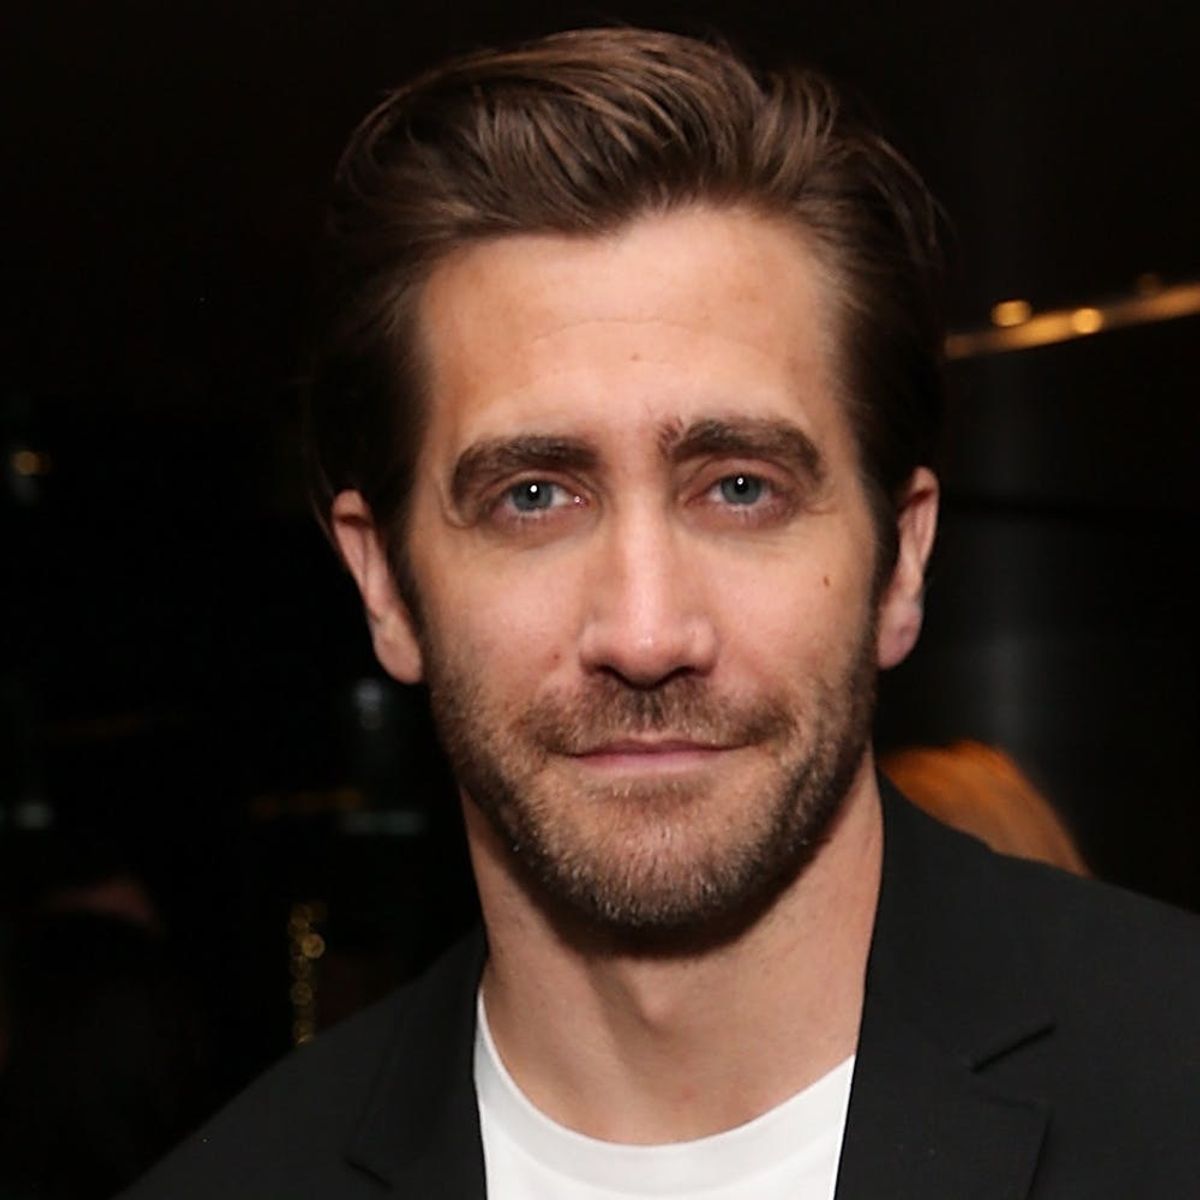 Jake Gyllenhaal Wants to Be “Set Up” on Dates More Often